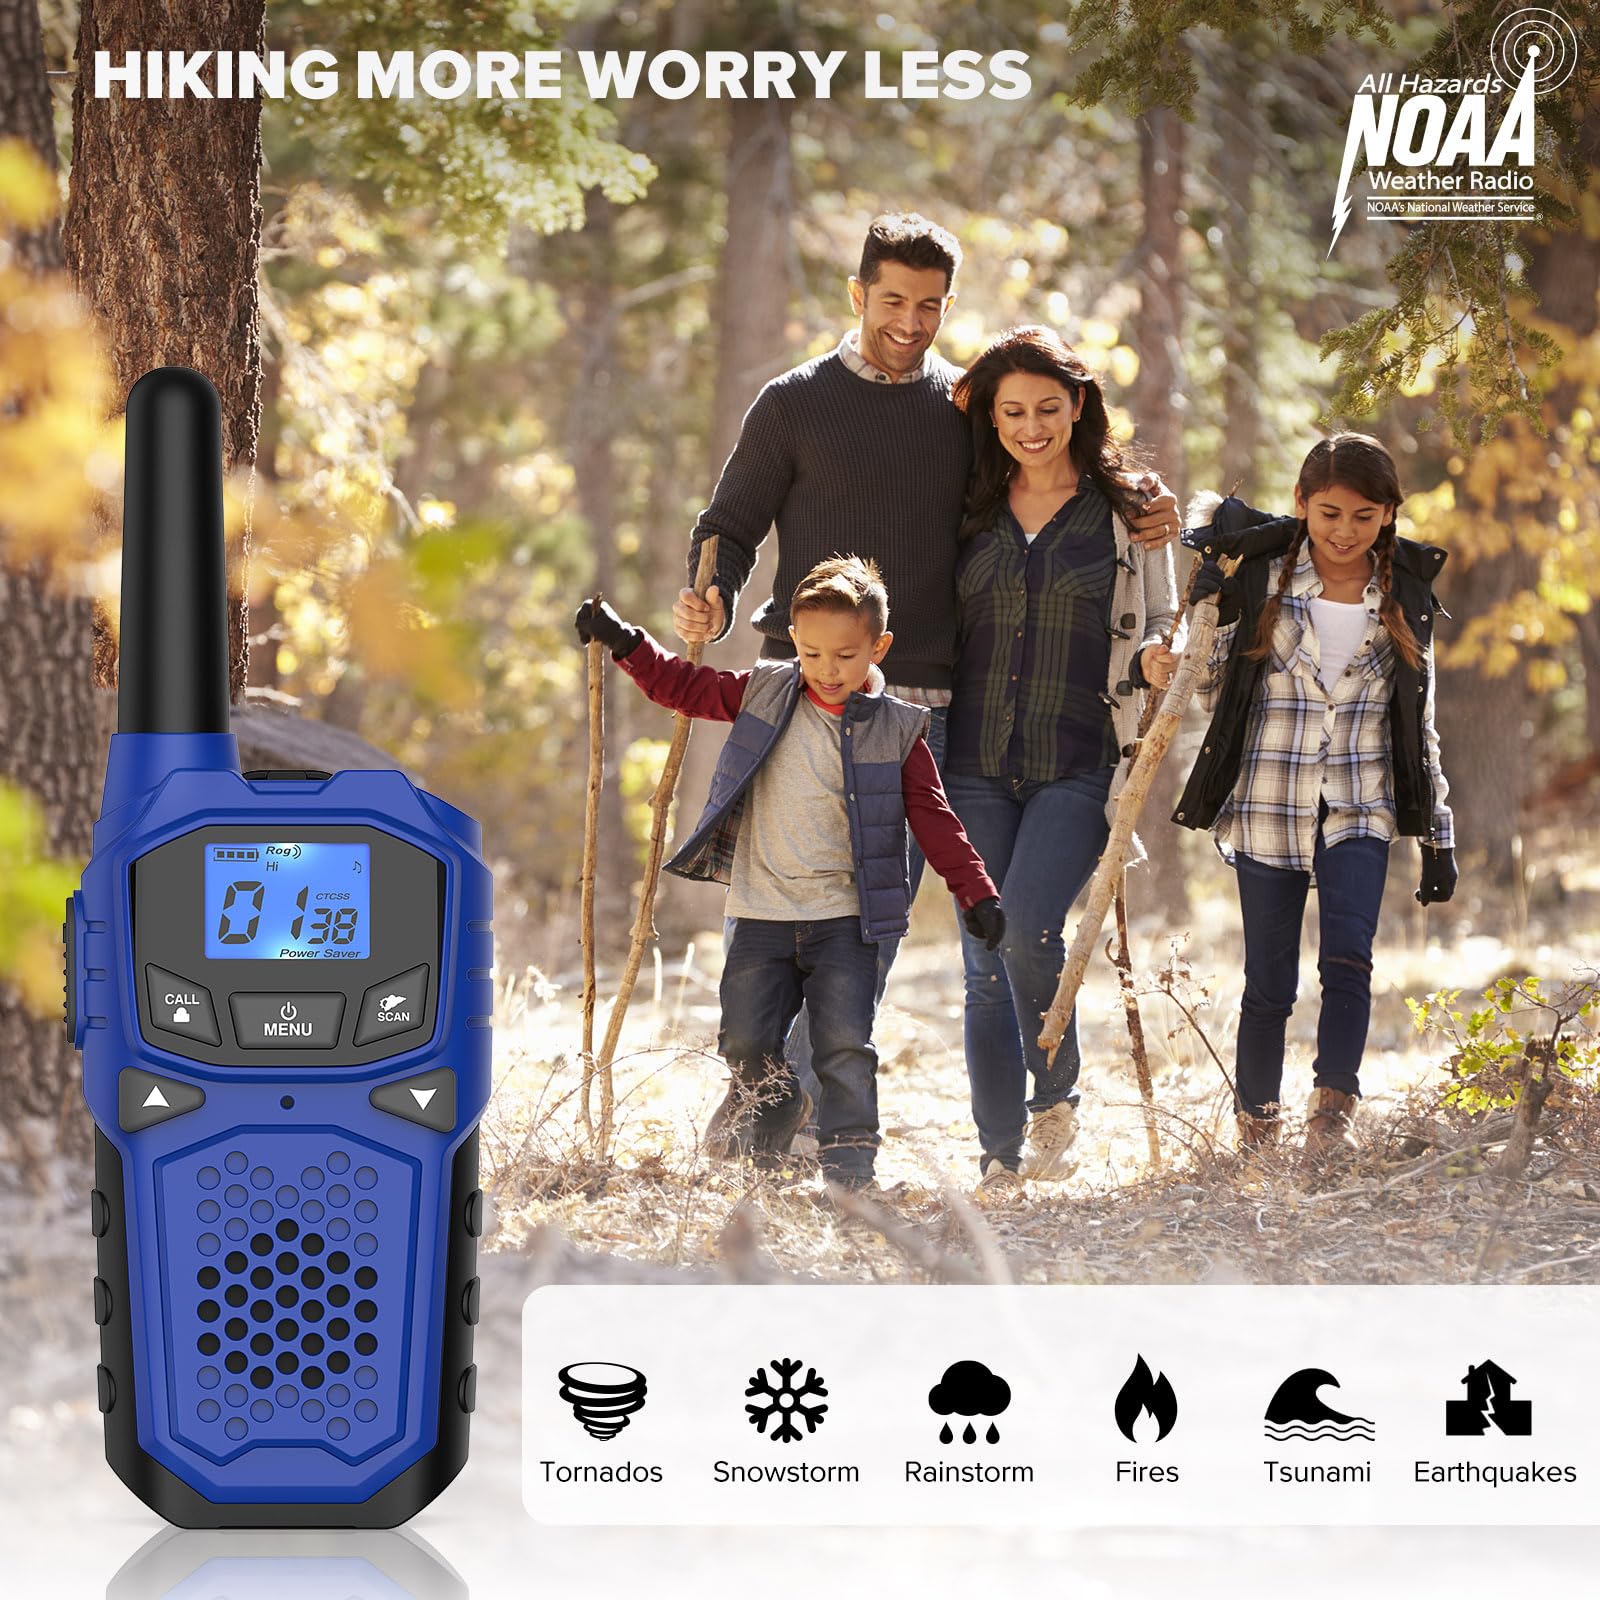 3 Walkie Talkies for Adults Long Range-WokTok Rechargeable Portable 2 Way Radios,Hiking Accessories Camping Gear,with SOS Siren,NOAA Weather Alert,VOX,Easy to Use Camping Hiking